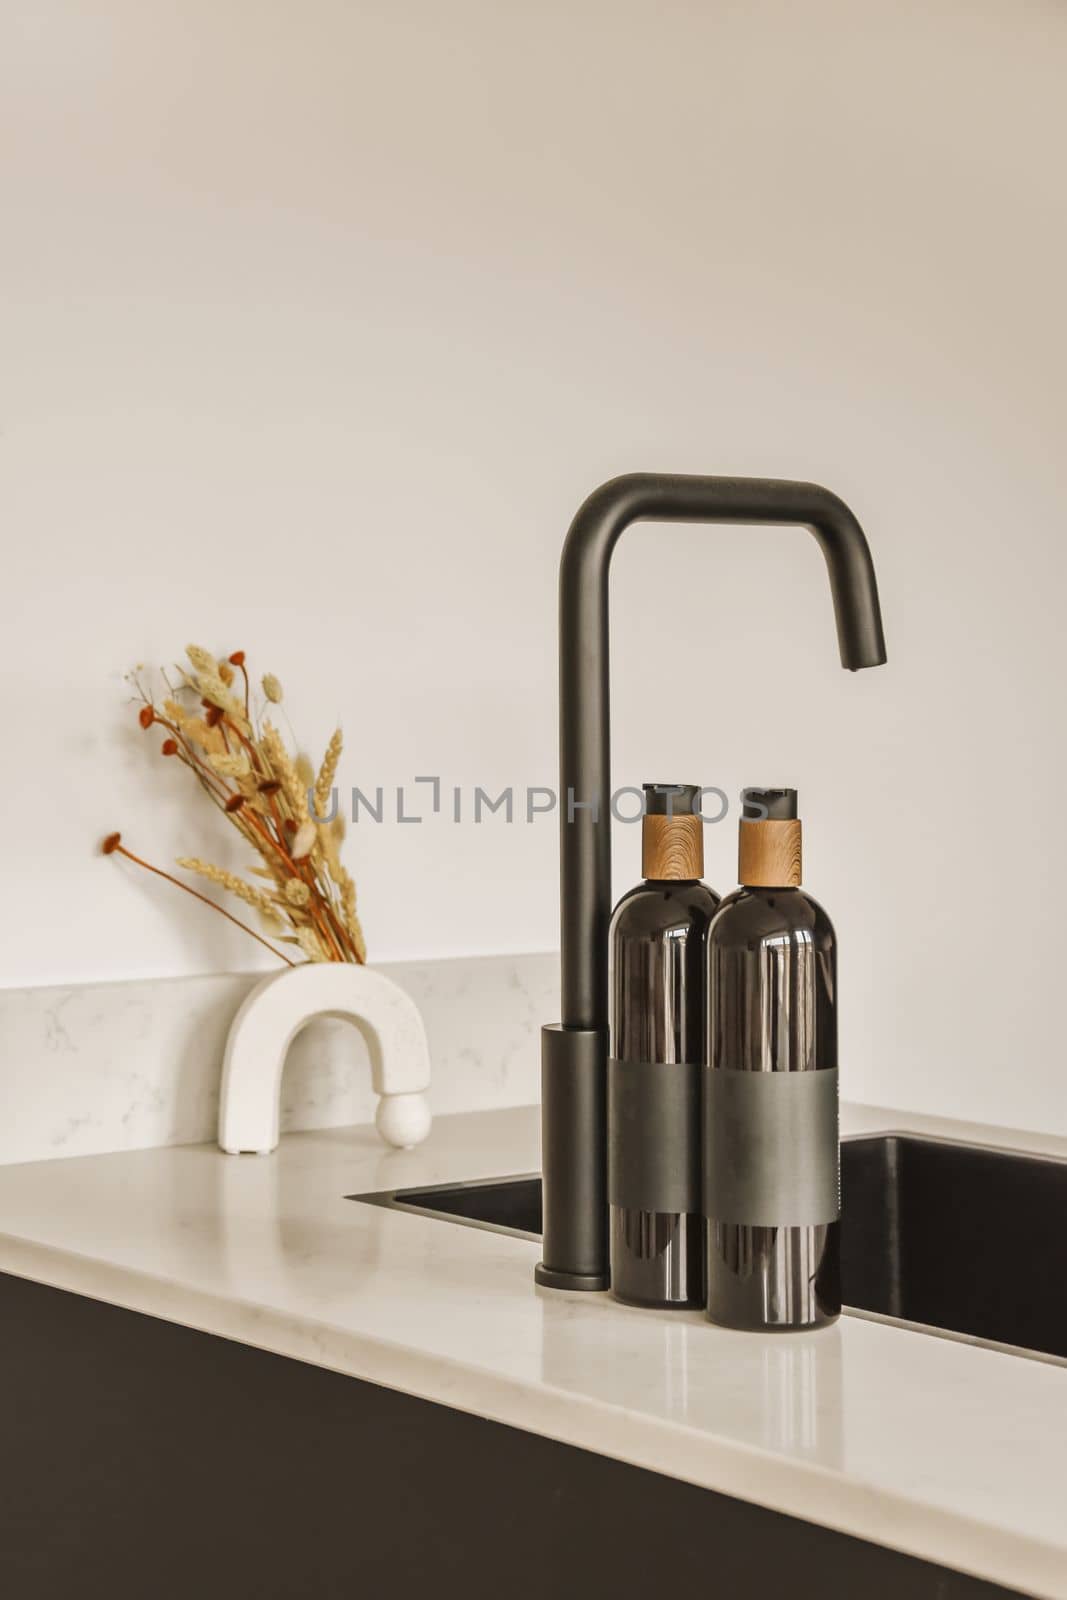 a kitchen sink with two faucets and a vase on the counter next to it in front of a white wall